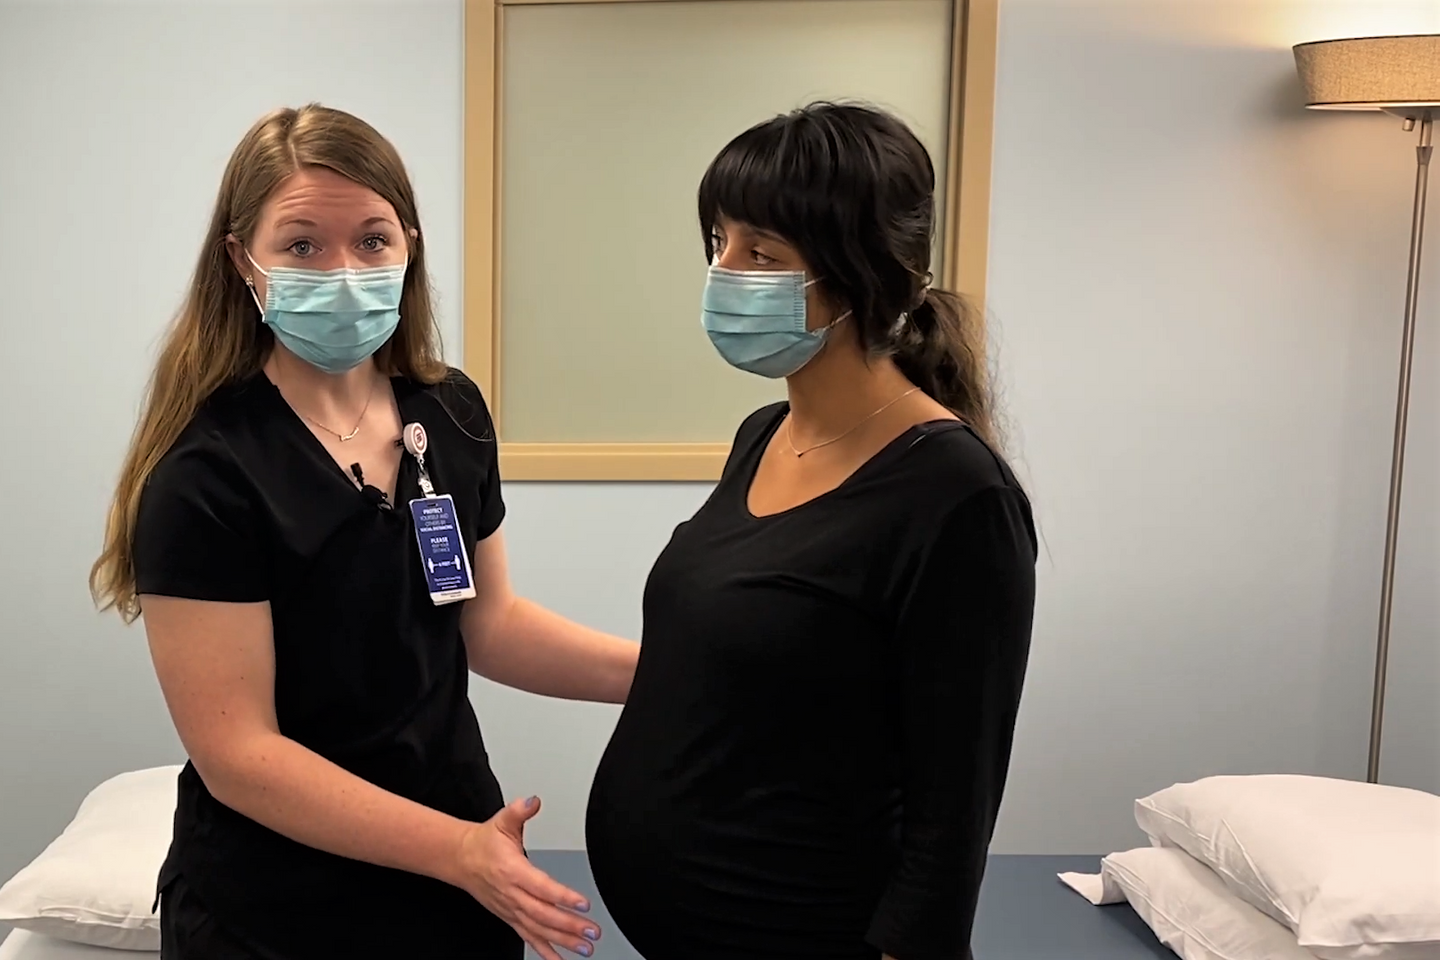 Colleen Gensheimer wears a mask while consulting pregnant, masked patient.